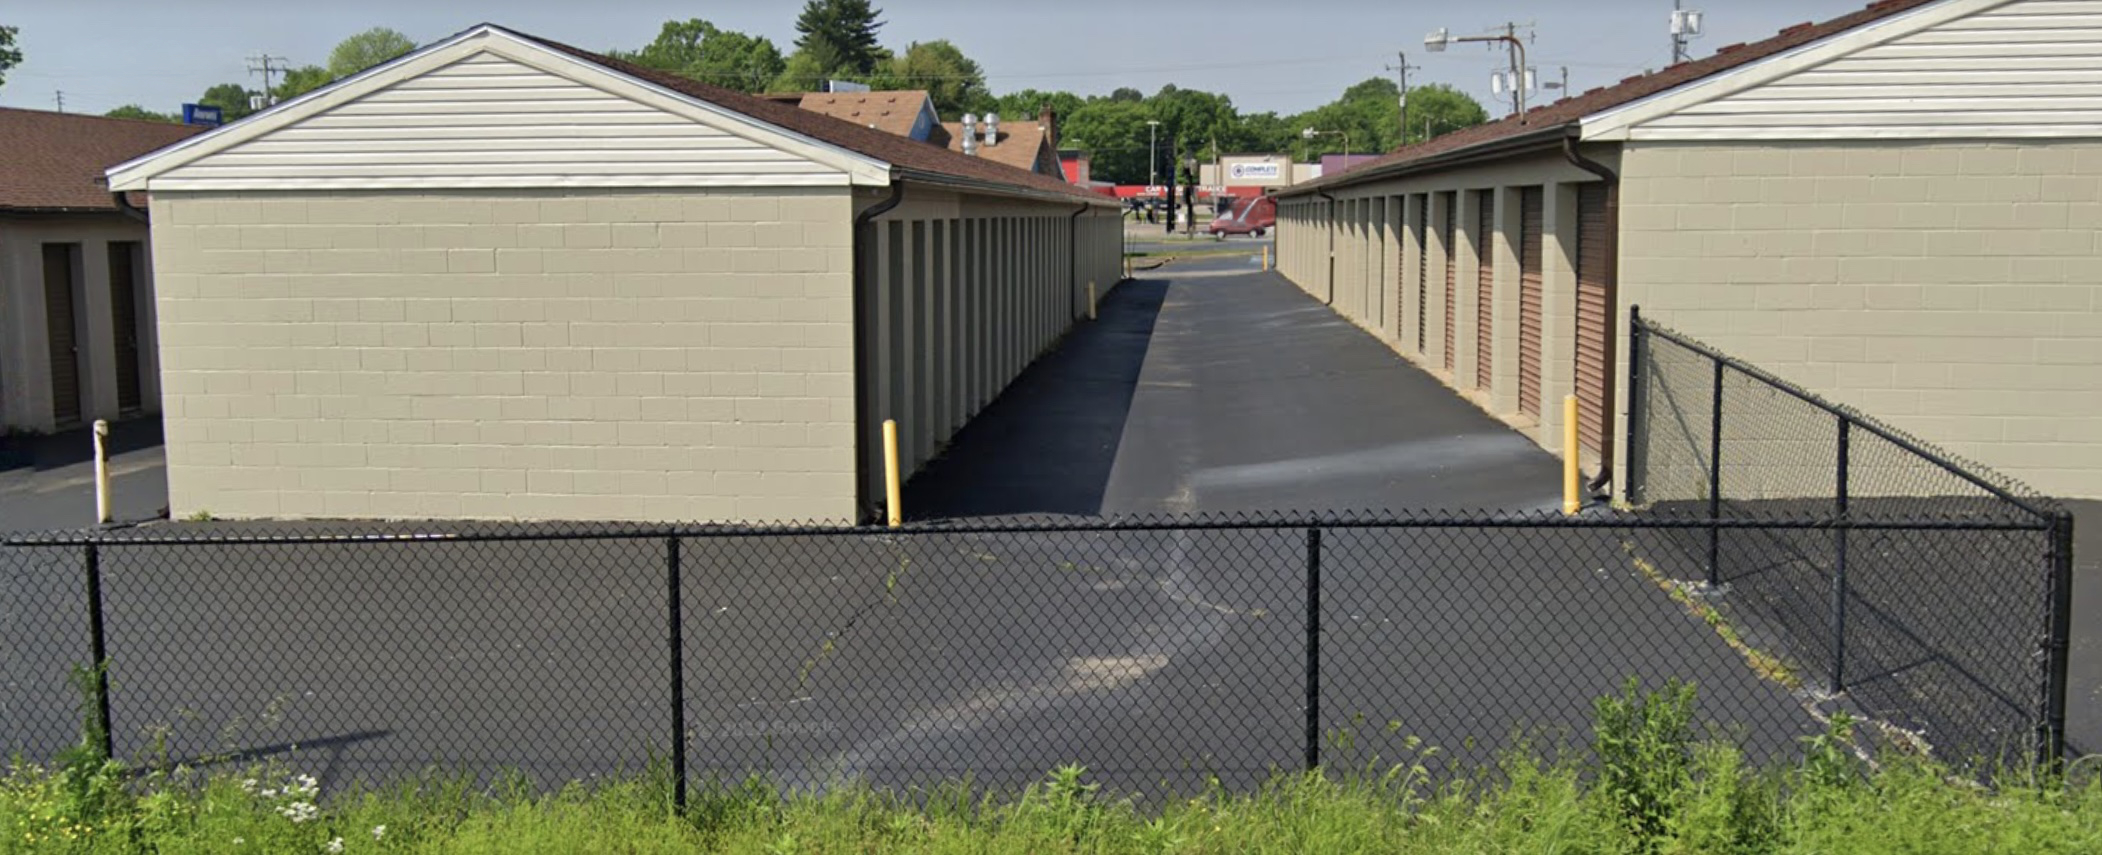 Self Storage Units in Hopkinsville, KY